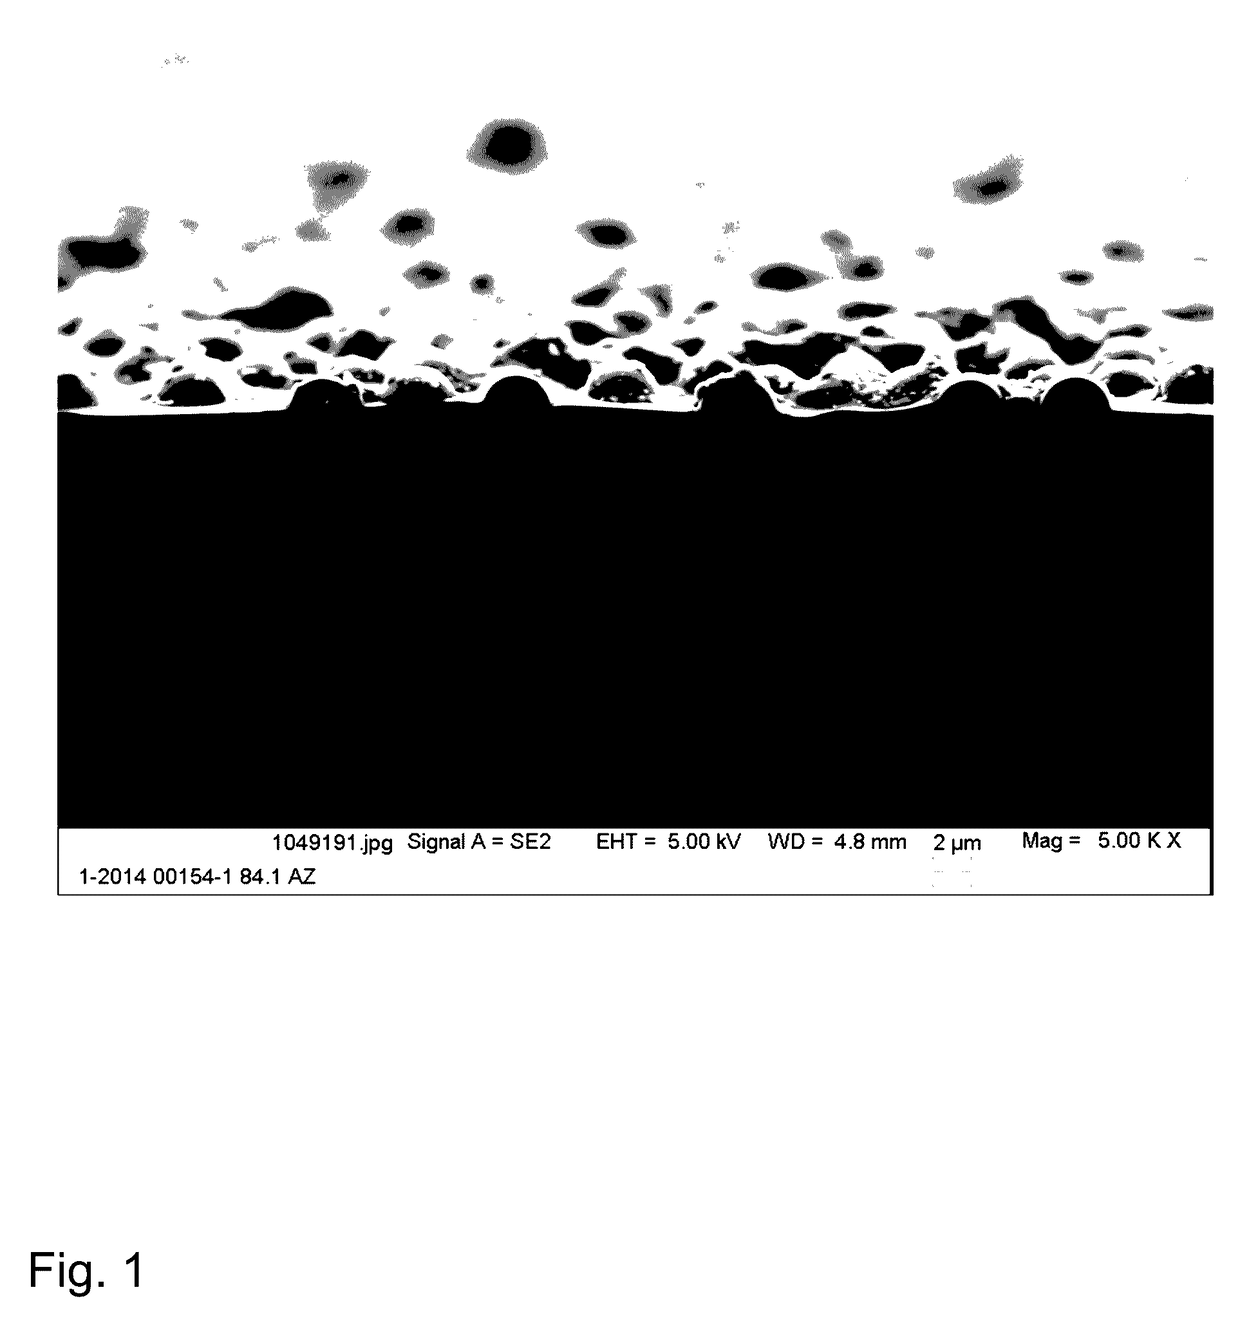 Method for producing a coated substrate, planar substrate, comprising at least two layers applied by means of heating, and the use of the coated substrate